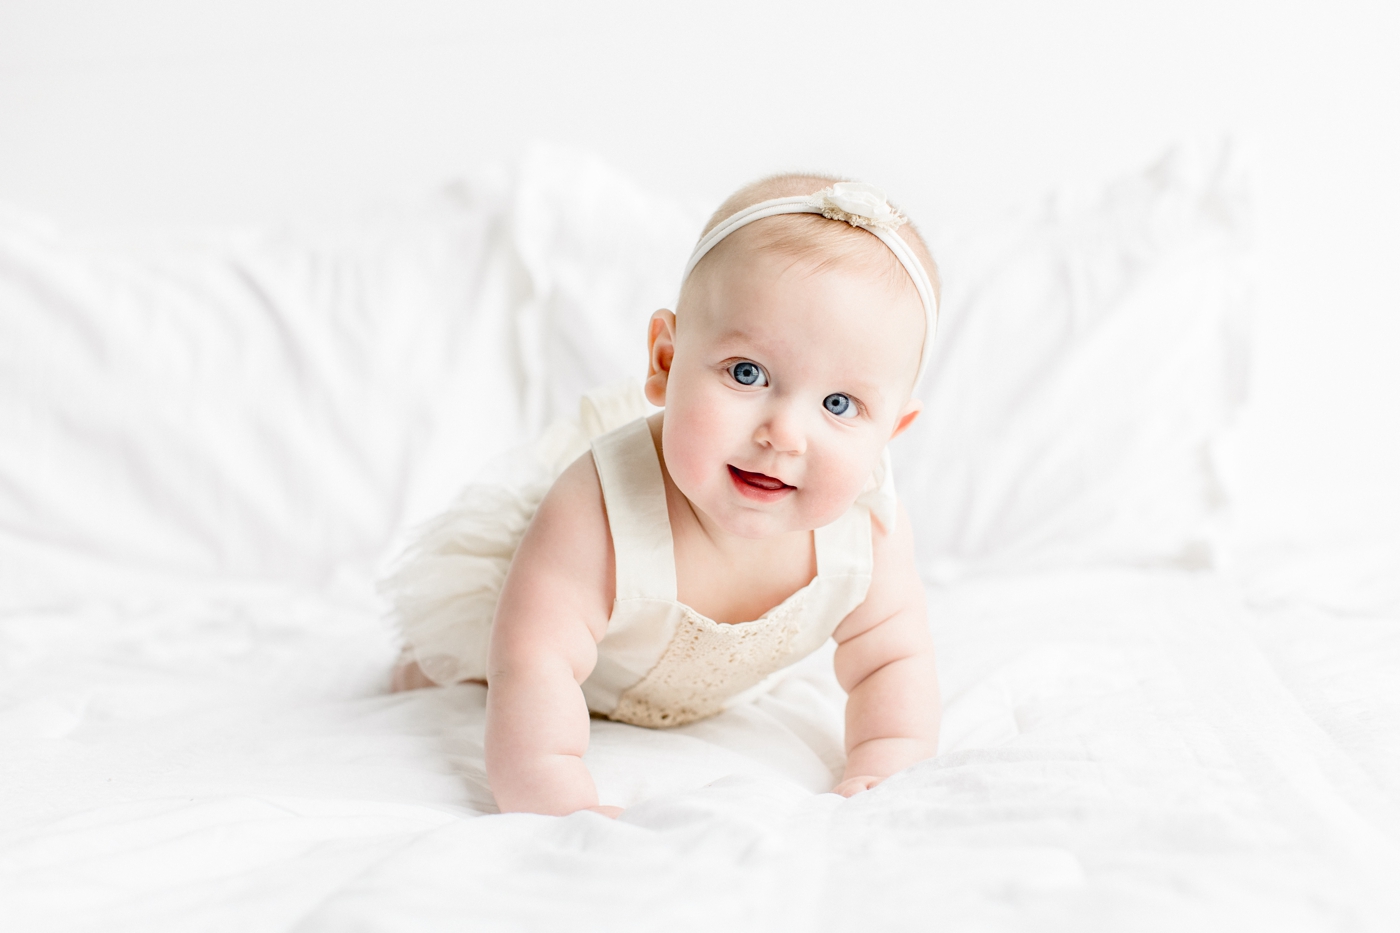 Baby girl pushing up on her arms during tummy time. Photo by Sana Ahmed Photography.